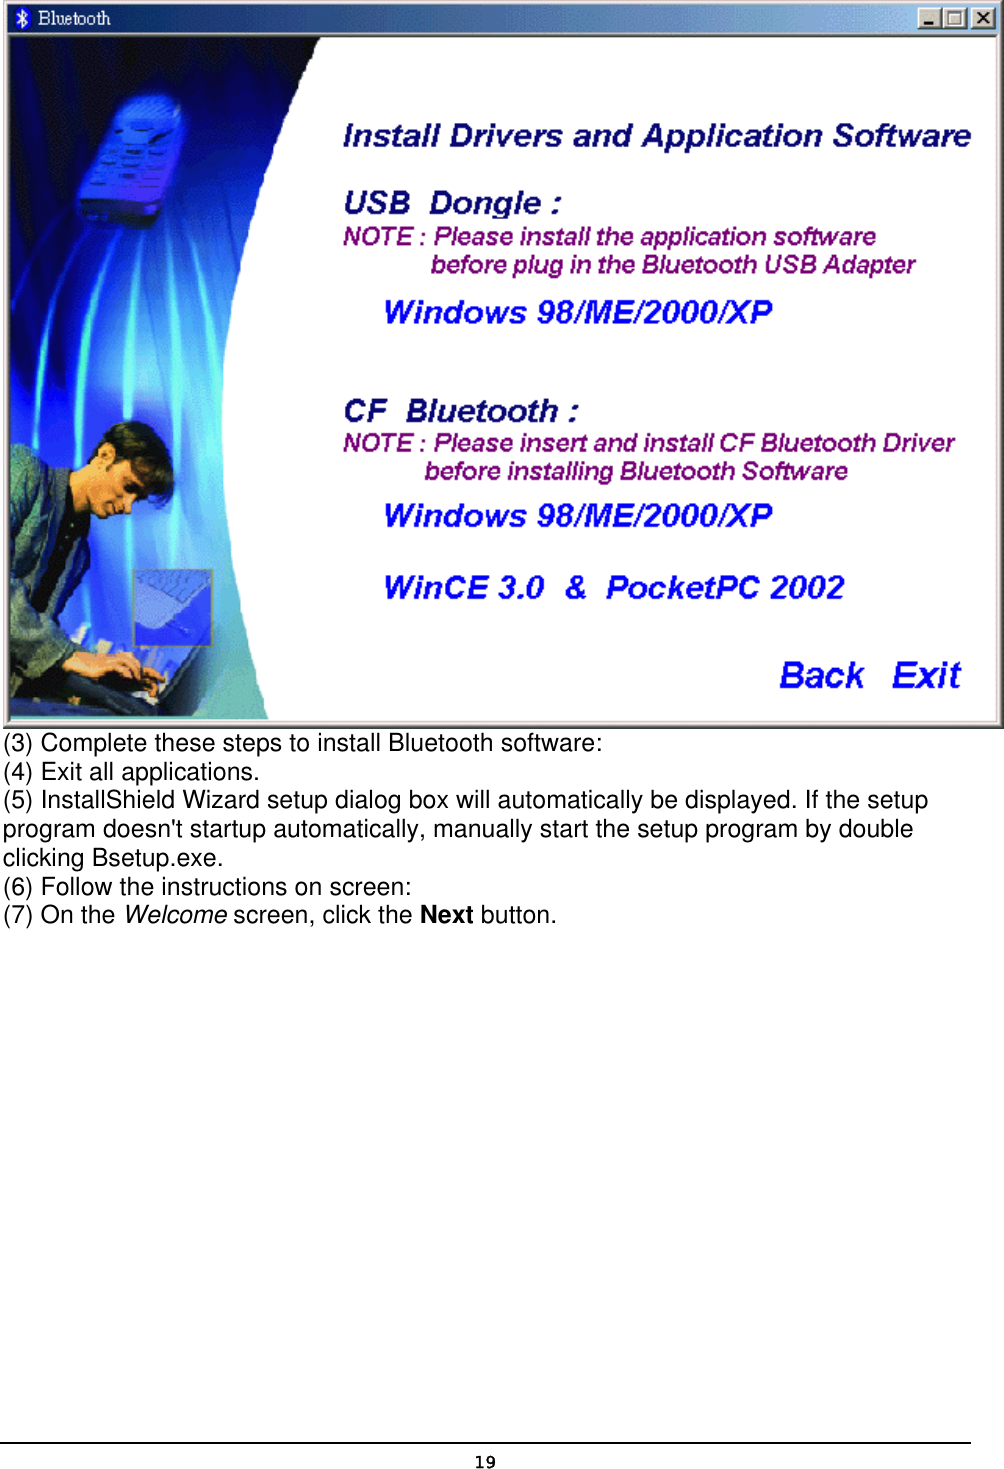   19 (3) Complete these steps to install Bluetooth software: (4) Exit all applications. (5) InstallShield Wizard setup dialog box will automatically be displayed. If the setup program doesn&apos;t startup automatically, manually start the setup program by double clicking Bsetup.exe. (6) Follow the instructions on screen: (7) On the Welcome screen, click the Next button. 